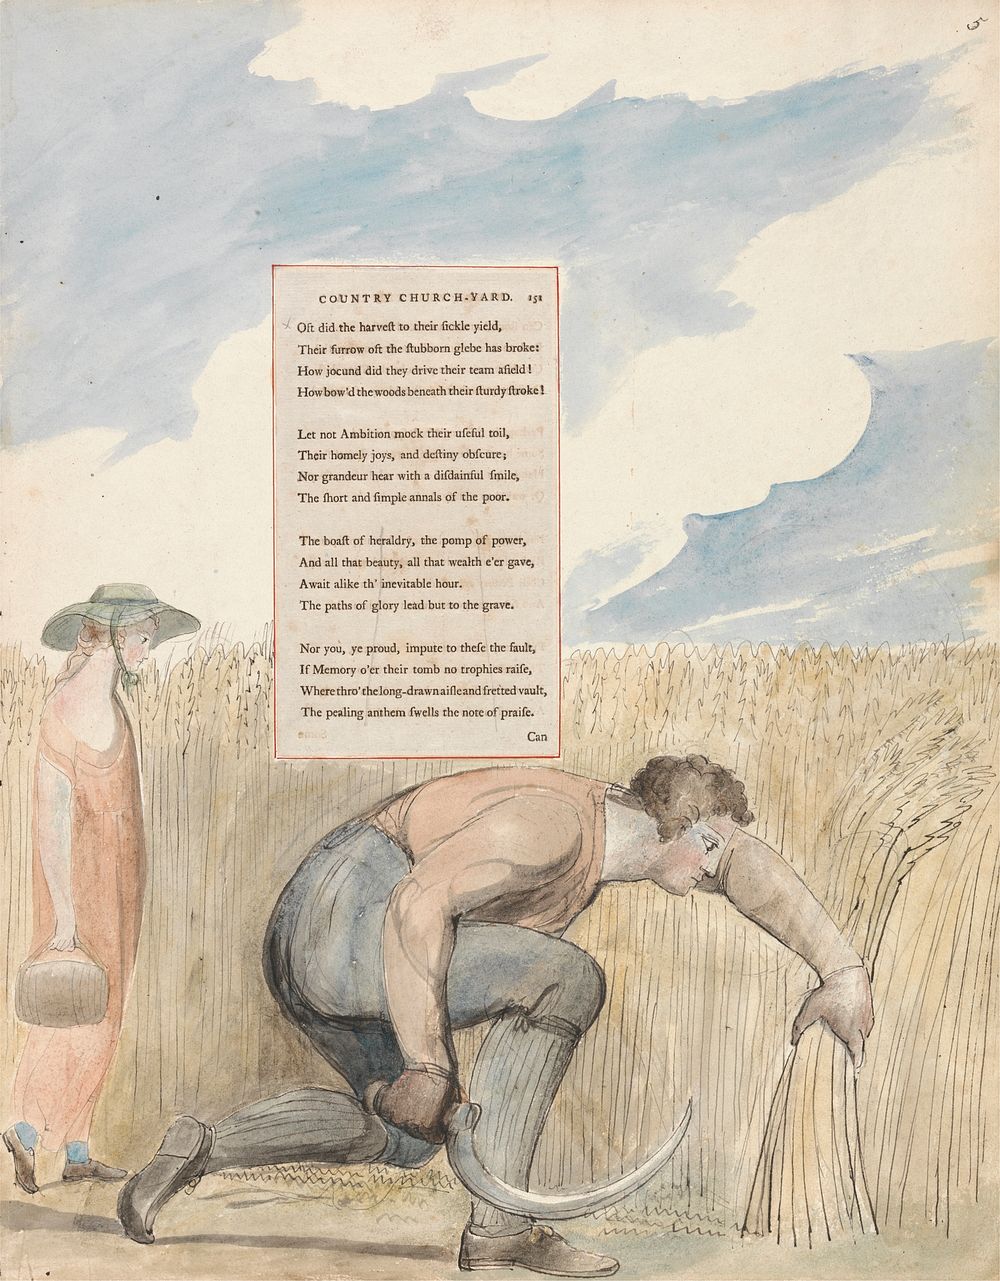 The Poems of Thomas Gray, Design 109, "Elegy Written in a Country Church-Yard." by William Blake. Original public domain…